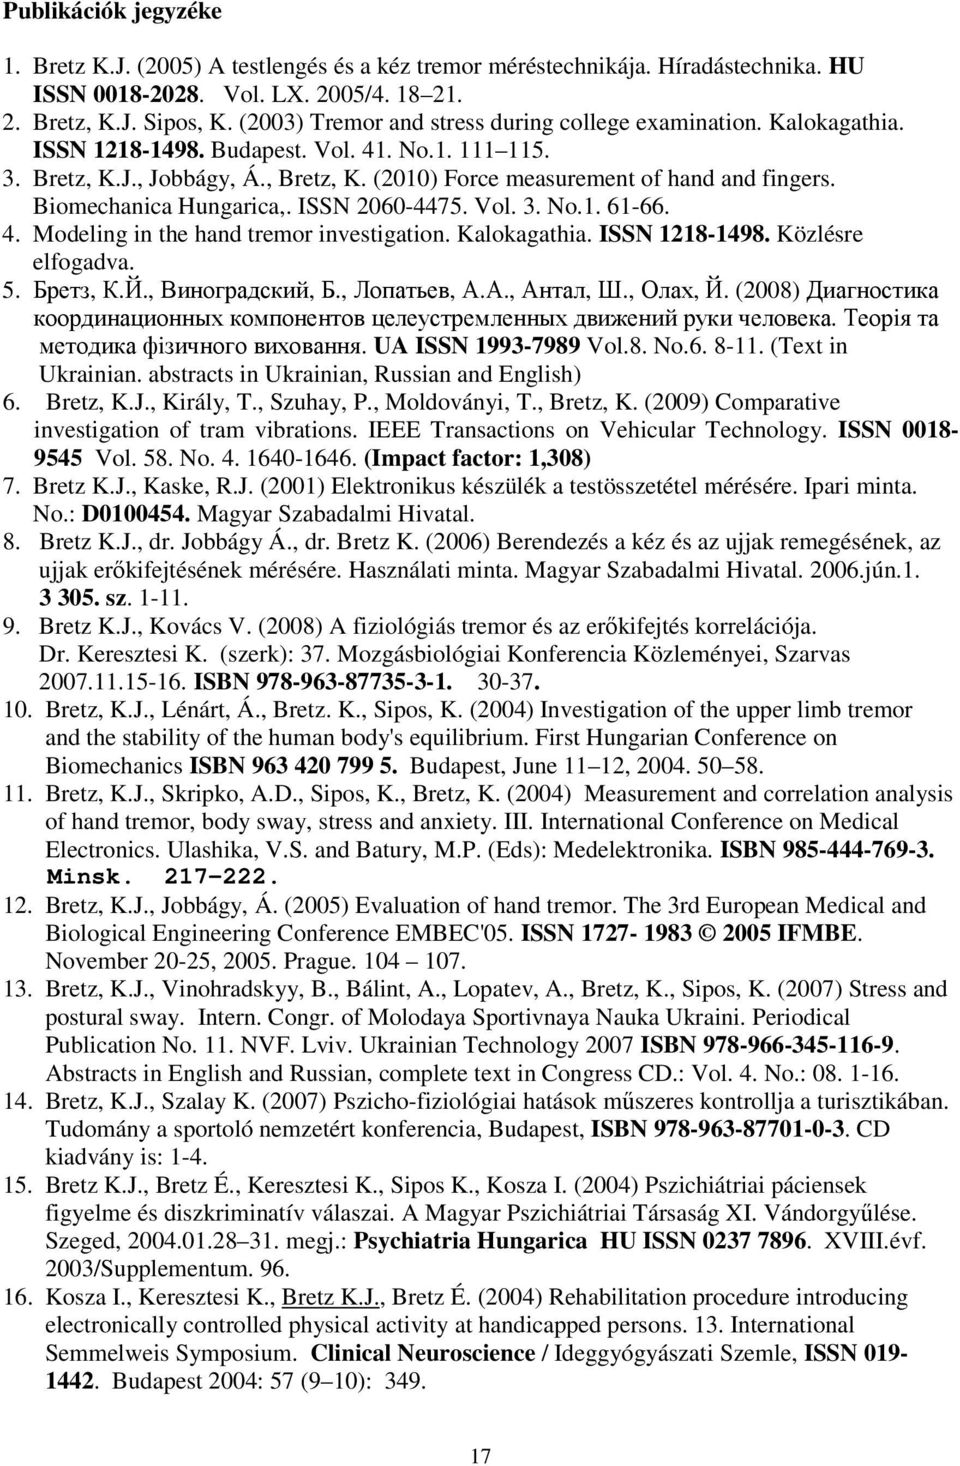 (2010) Force measurement of hand and fingers. Biomechanica Hungarica,. ISSN 2060-4475. Vol. 3. No.1. 61-66. 4. Modeling in the hand tremor investigation. Kalokagathia. ISSN 1218-1498.